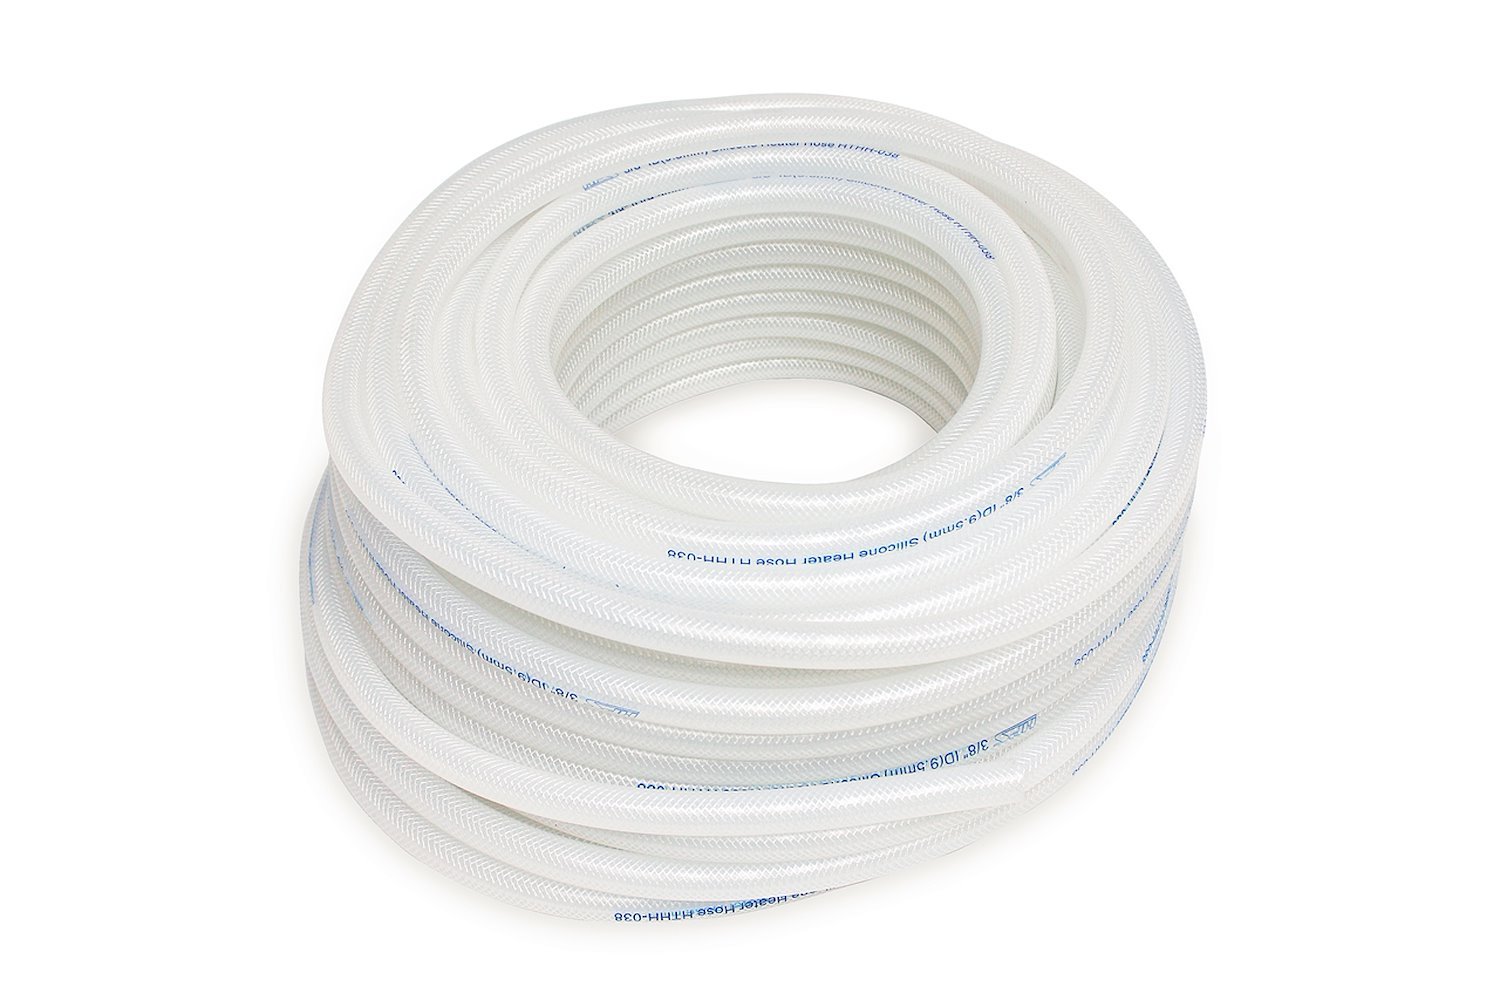 HTHH-025-CLEARx100 Silicone Heater Hose Tubing, High-Temp Reinforced, 1/4 in. ID, 100 ft. Roll, Clear